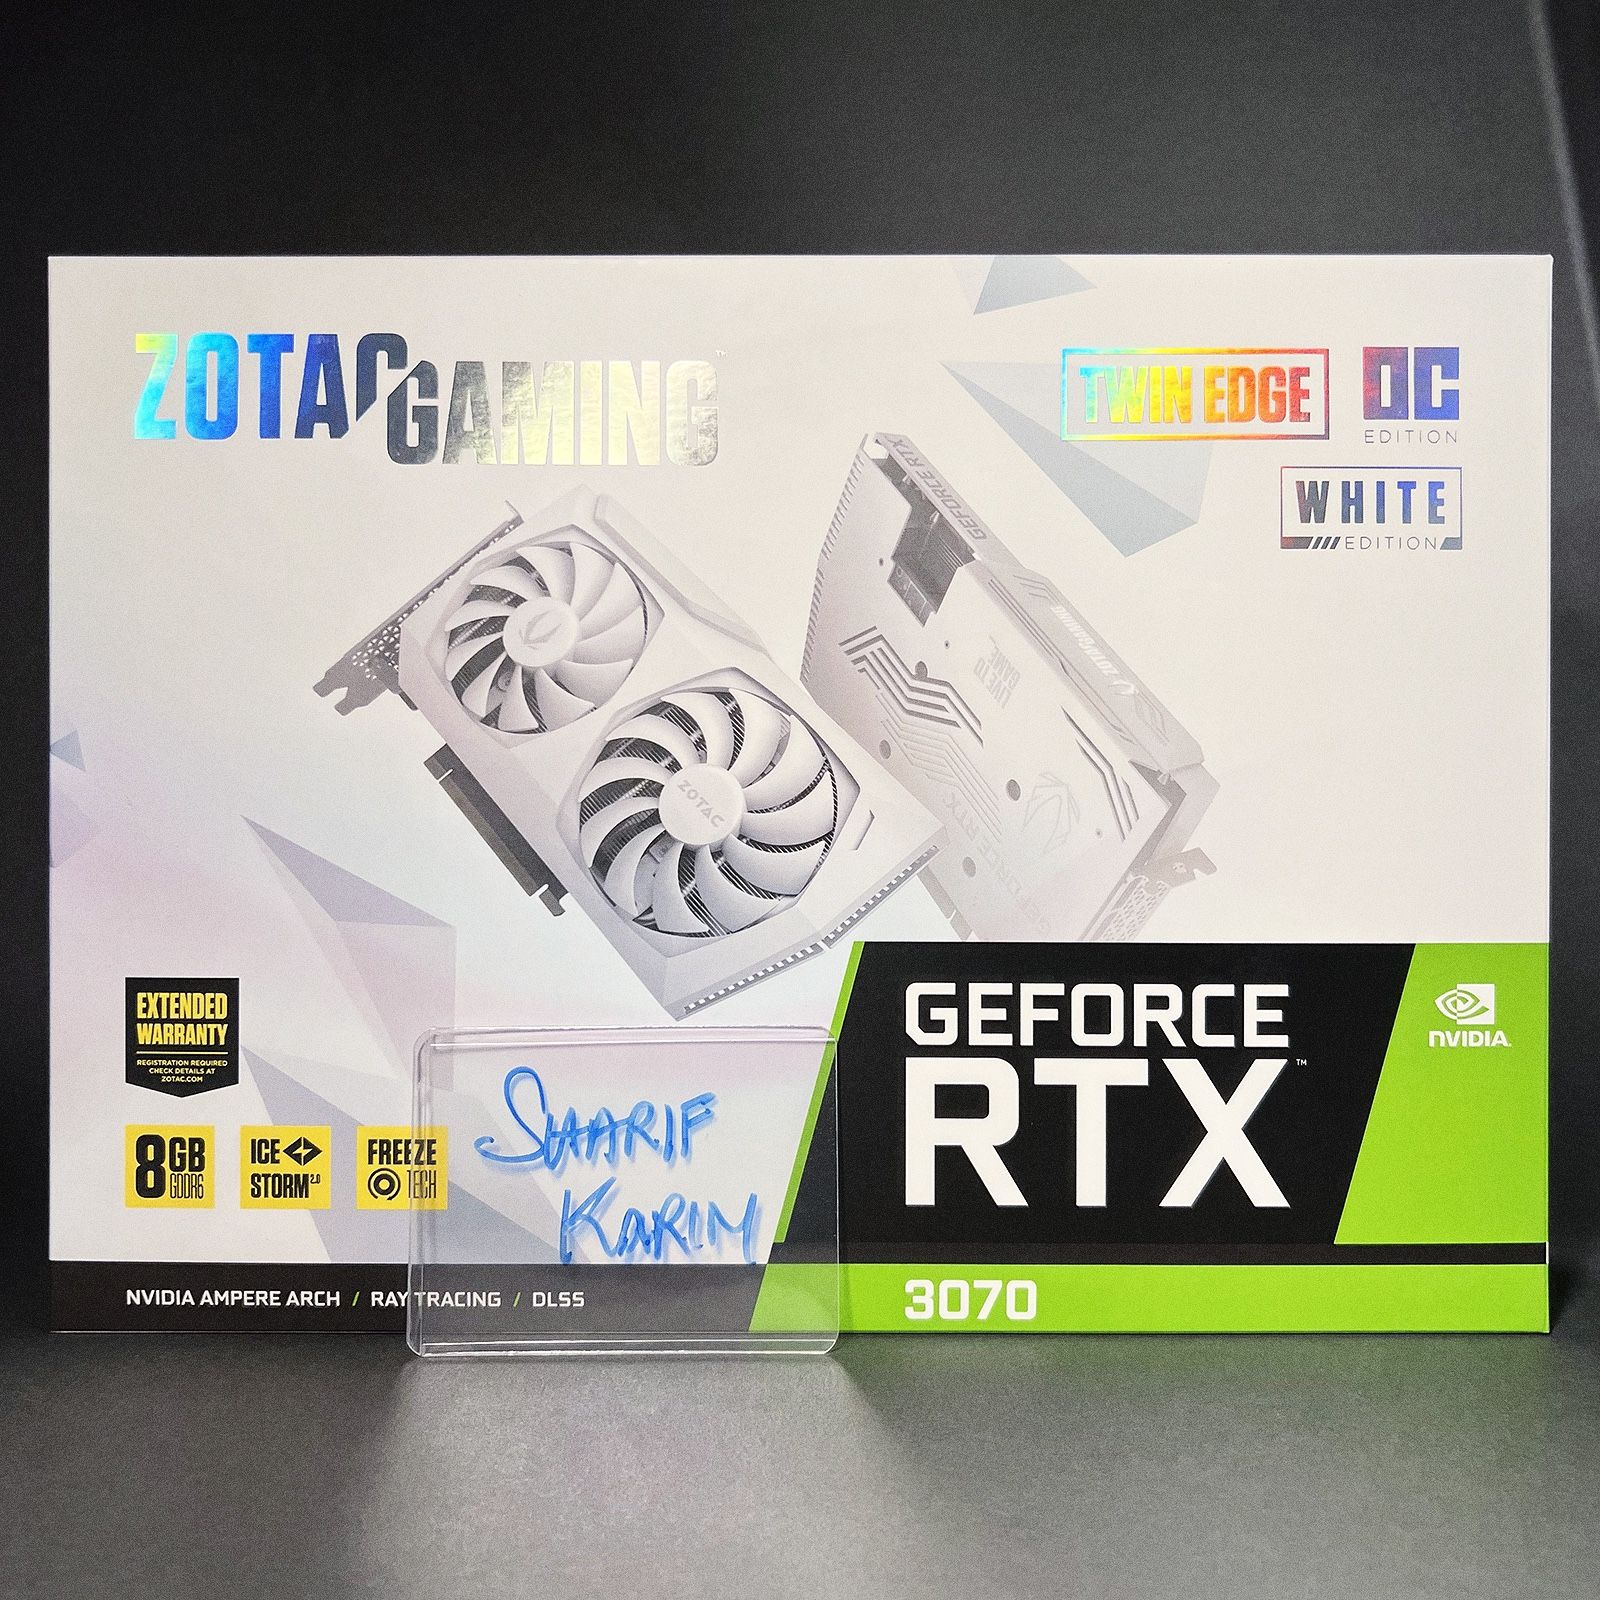 ZOTAC Gaming GeForce RTX 3070 Twin Edge OC White Edition 8GB GDDR6 Graphics Card, Brand New, Sealed